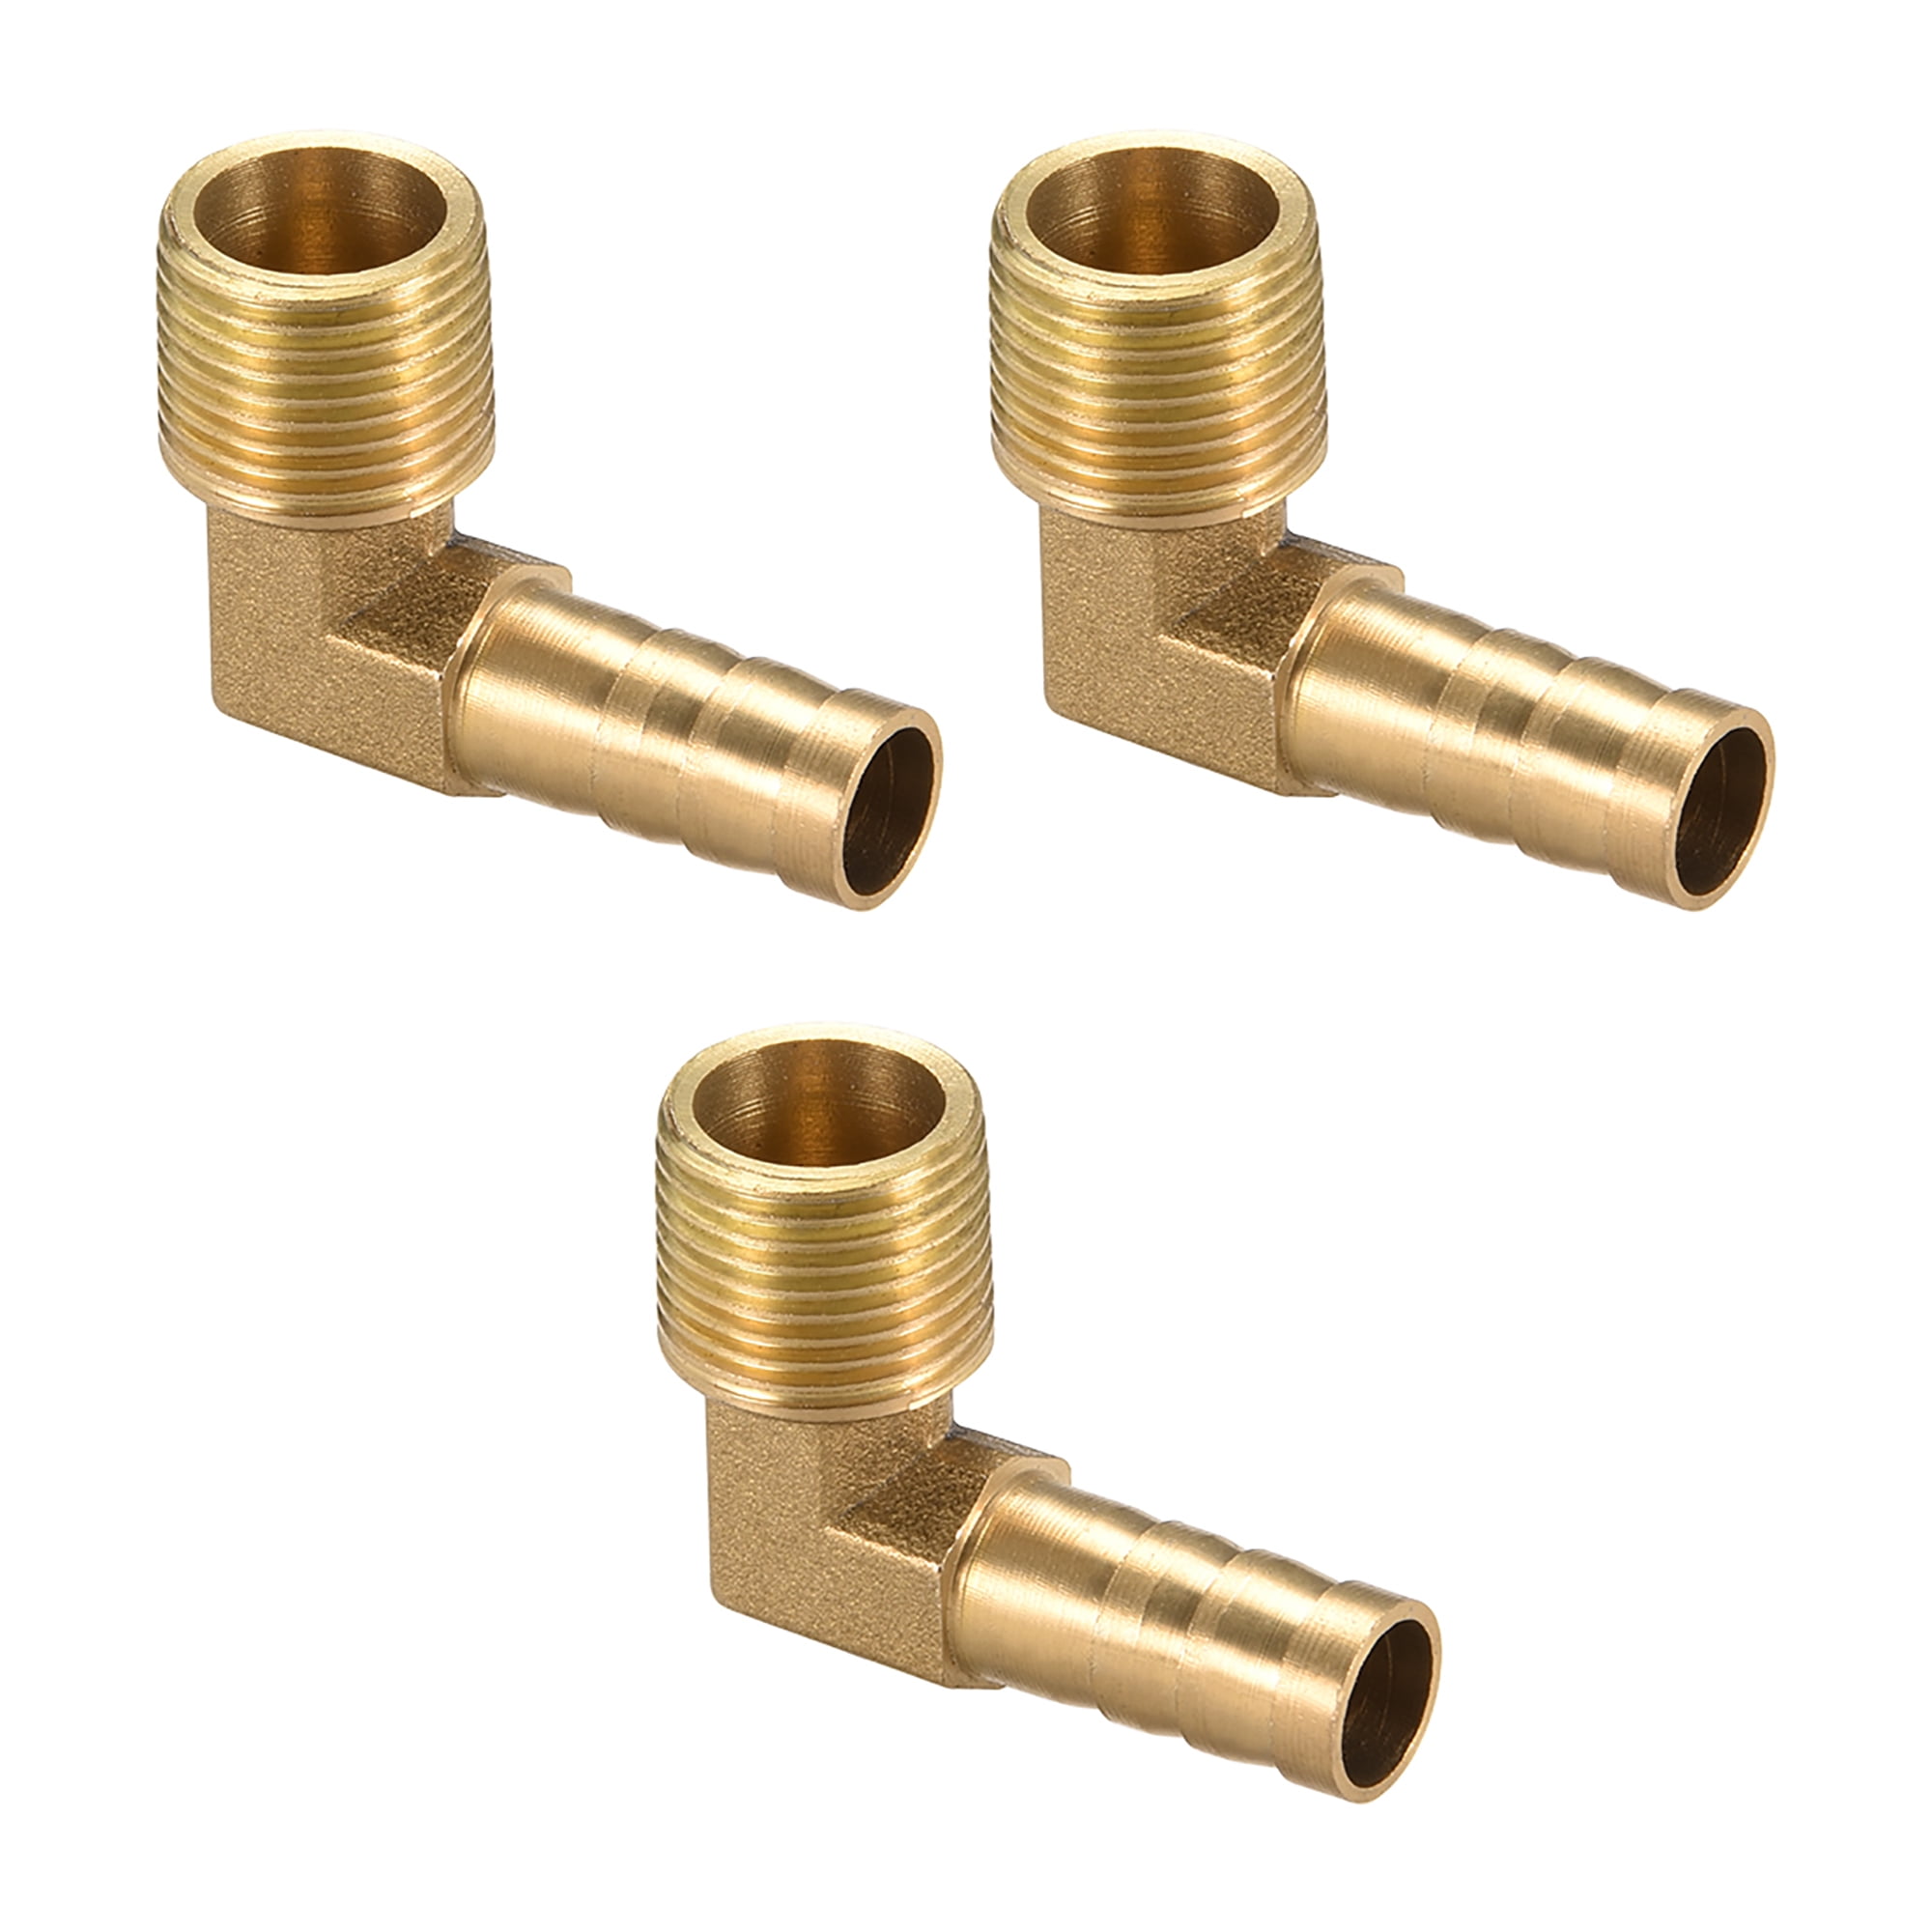 Brass Barb Hose Fitting 90 Degree Elbow 10mm Barbed x 3/8 PT Male Thread 